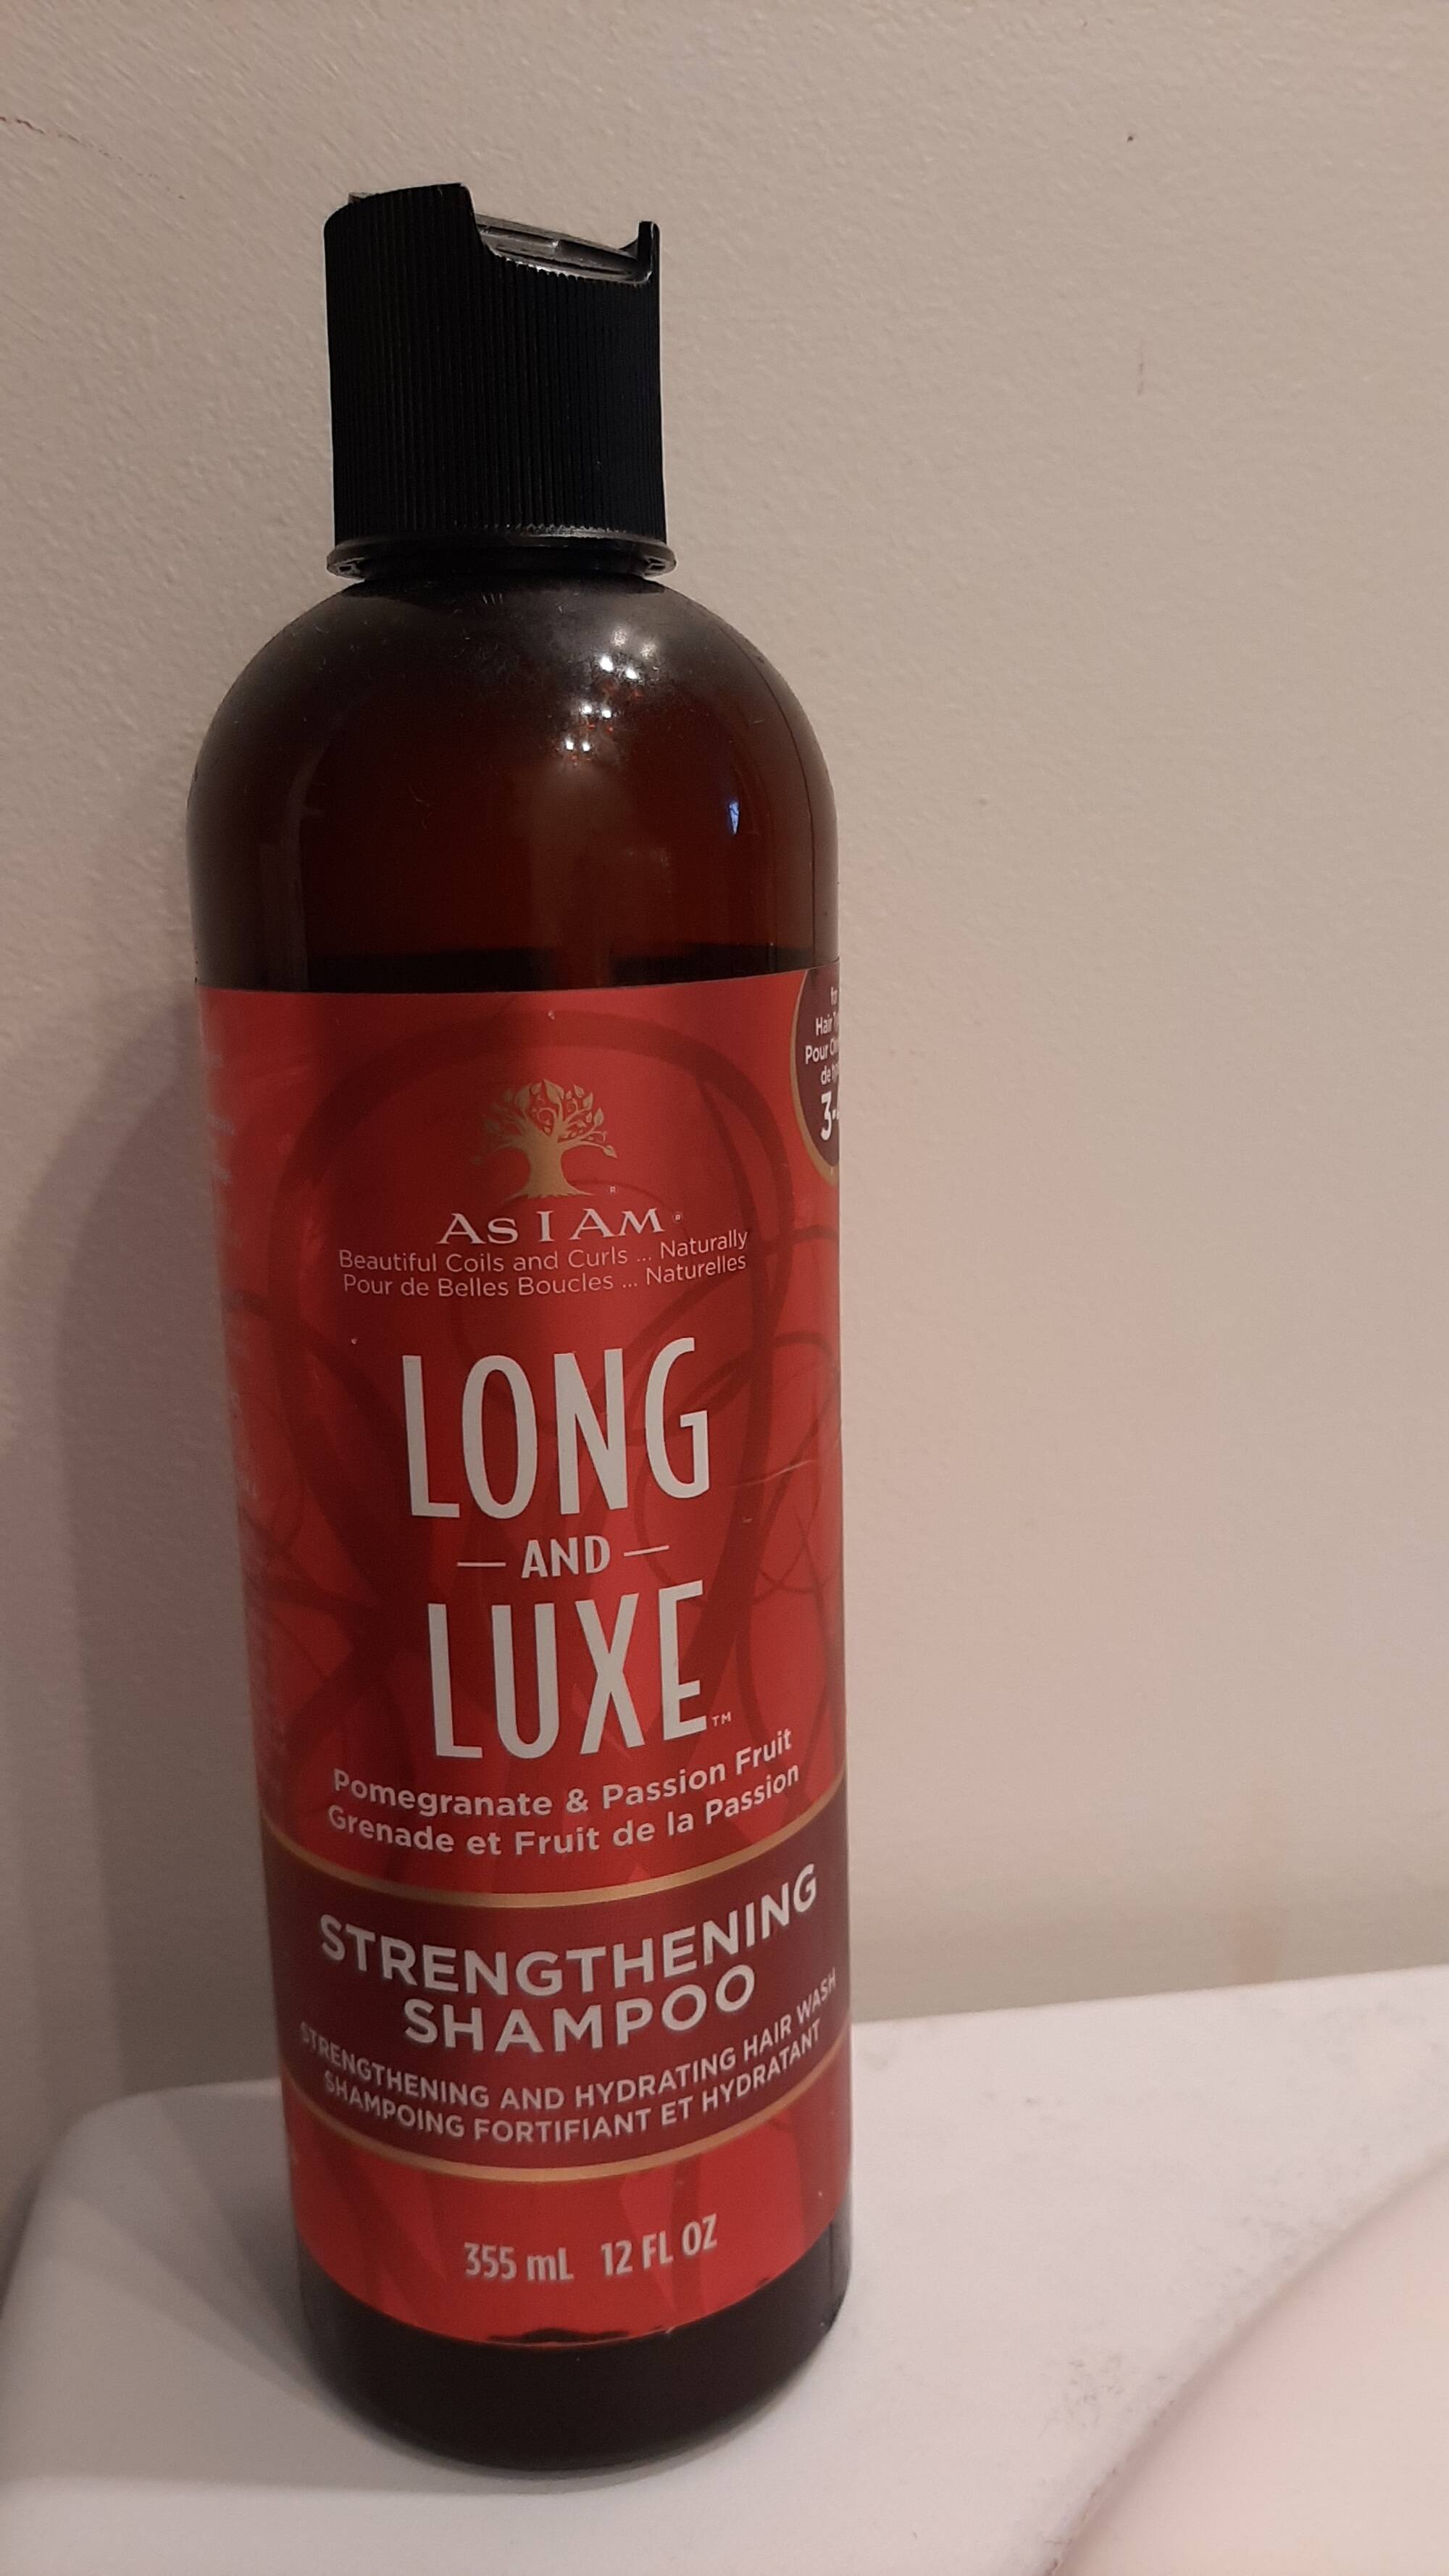 AS I AM - Long and luxe - Strengthening shampoo